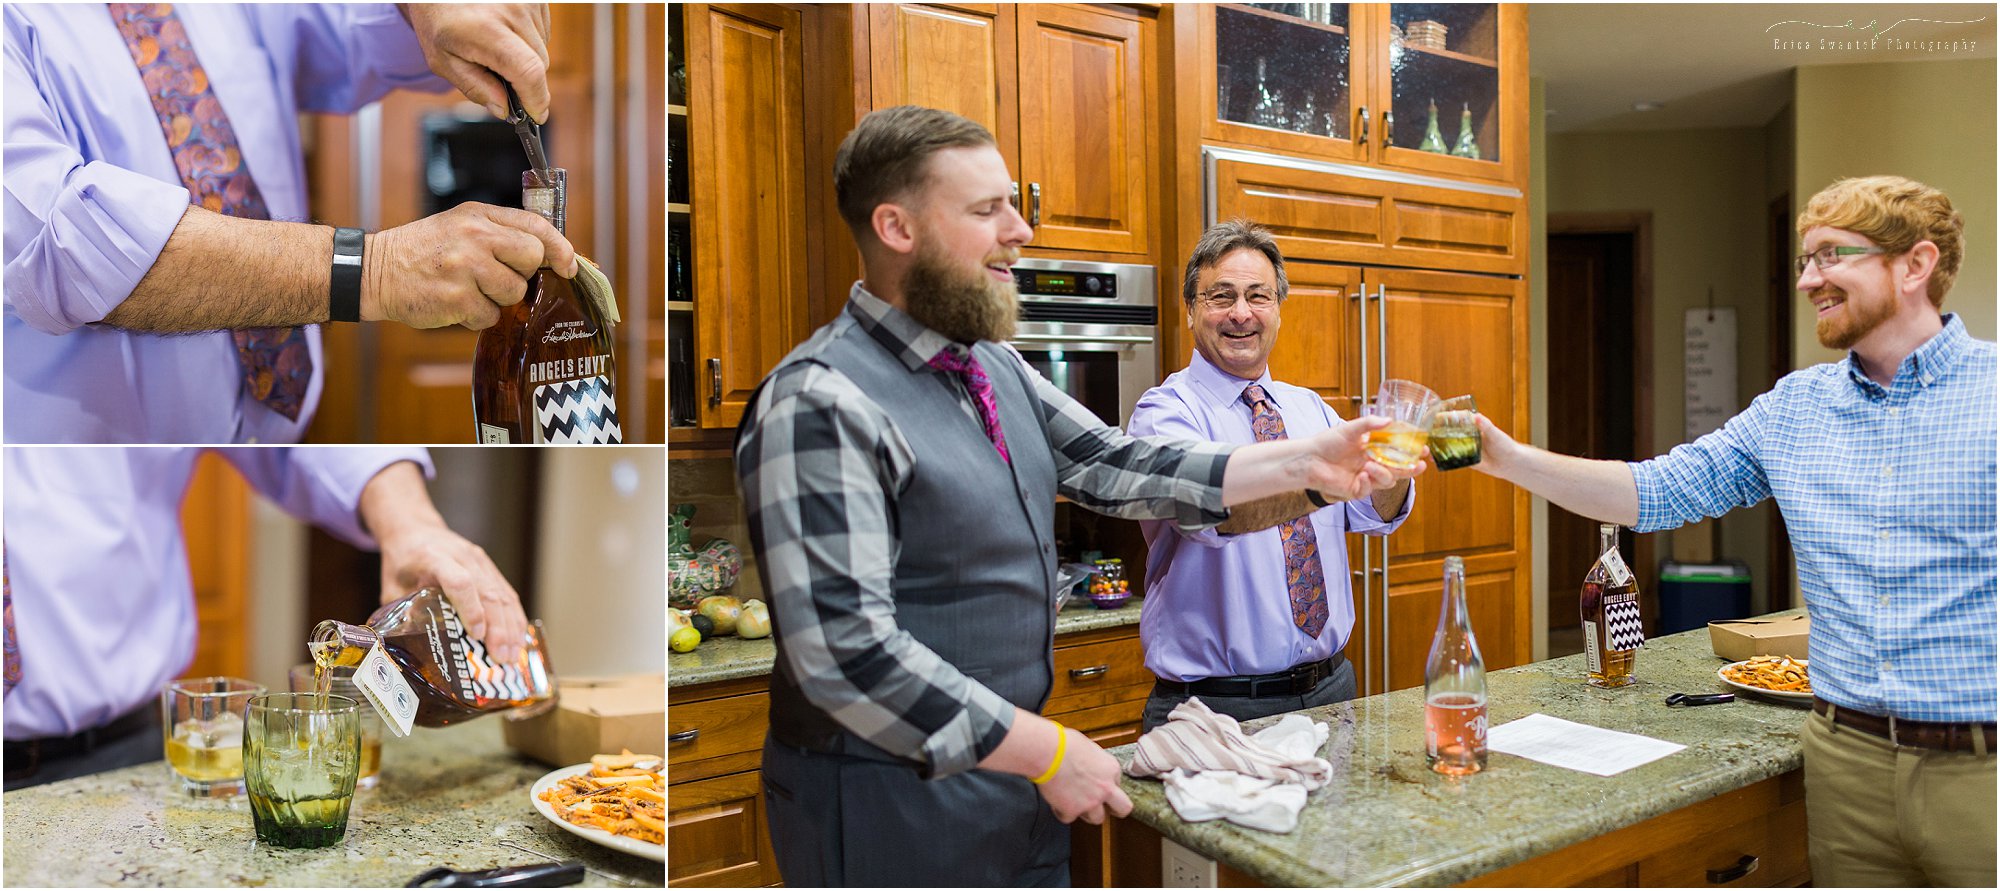 The groom, his father and brother-in-law all enjoy a shot of whiskey that was a gift from his bride to be in Bend, Oregon. | Erica Swantek Photography